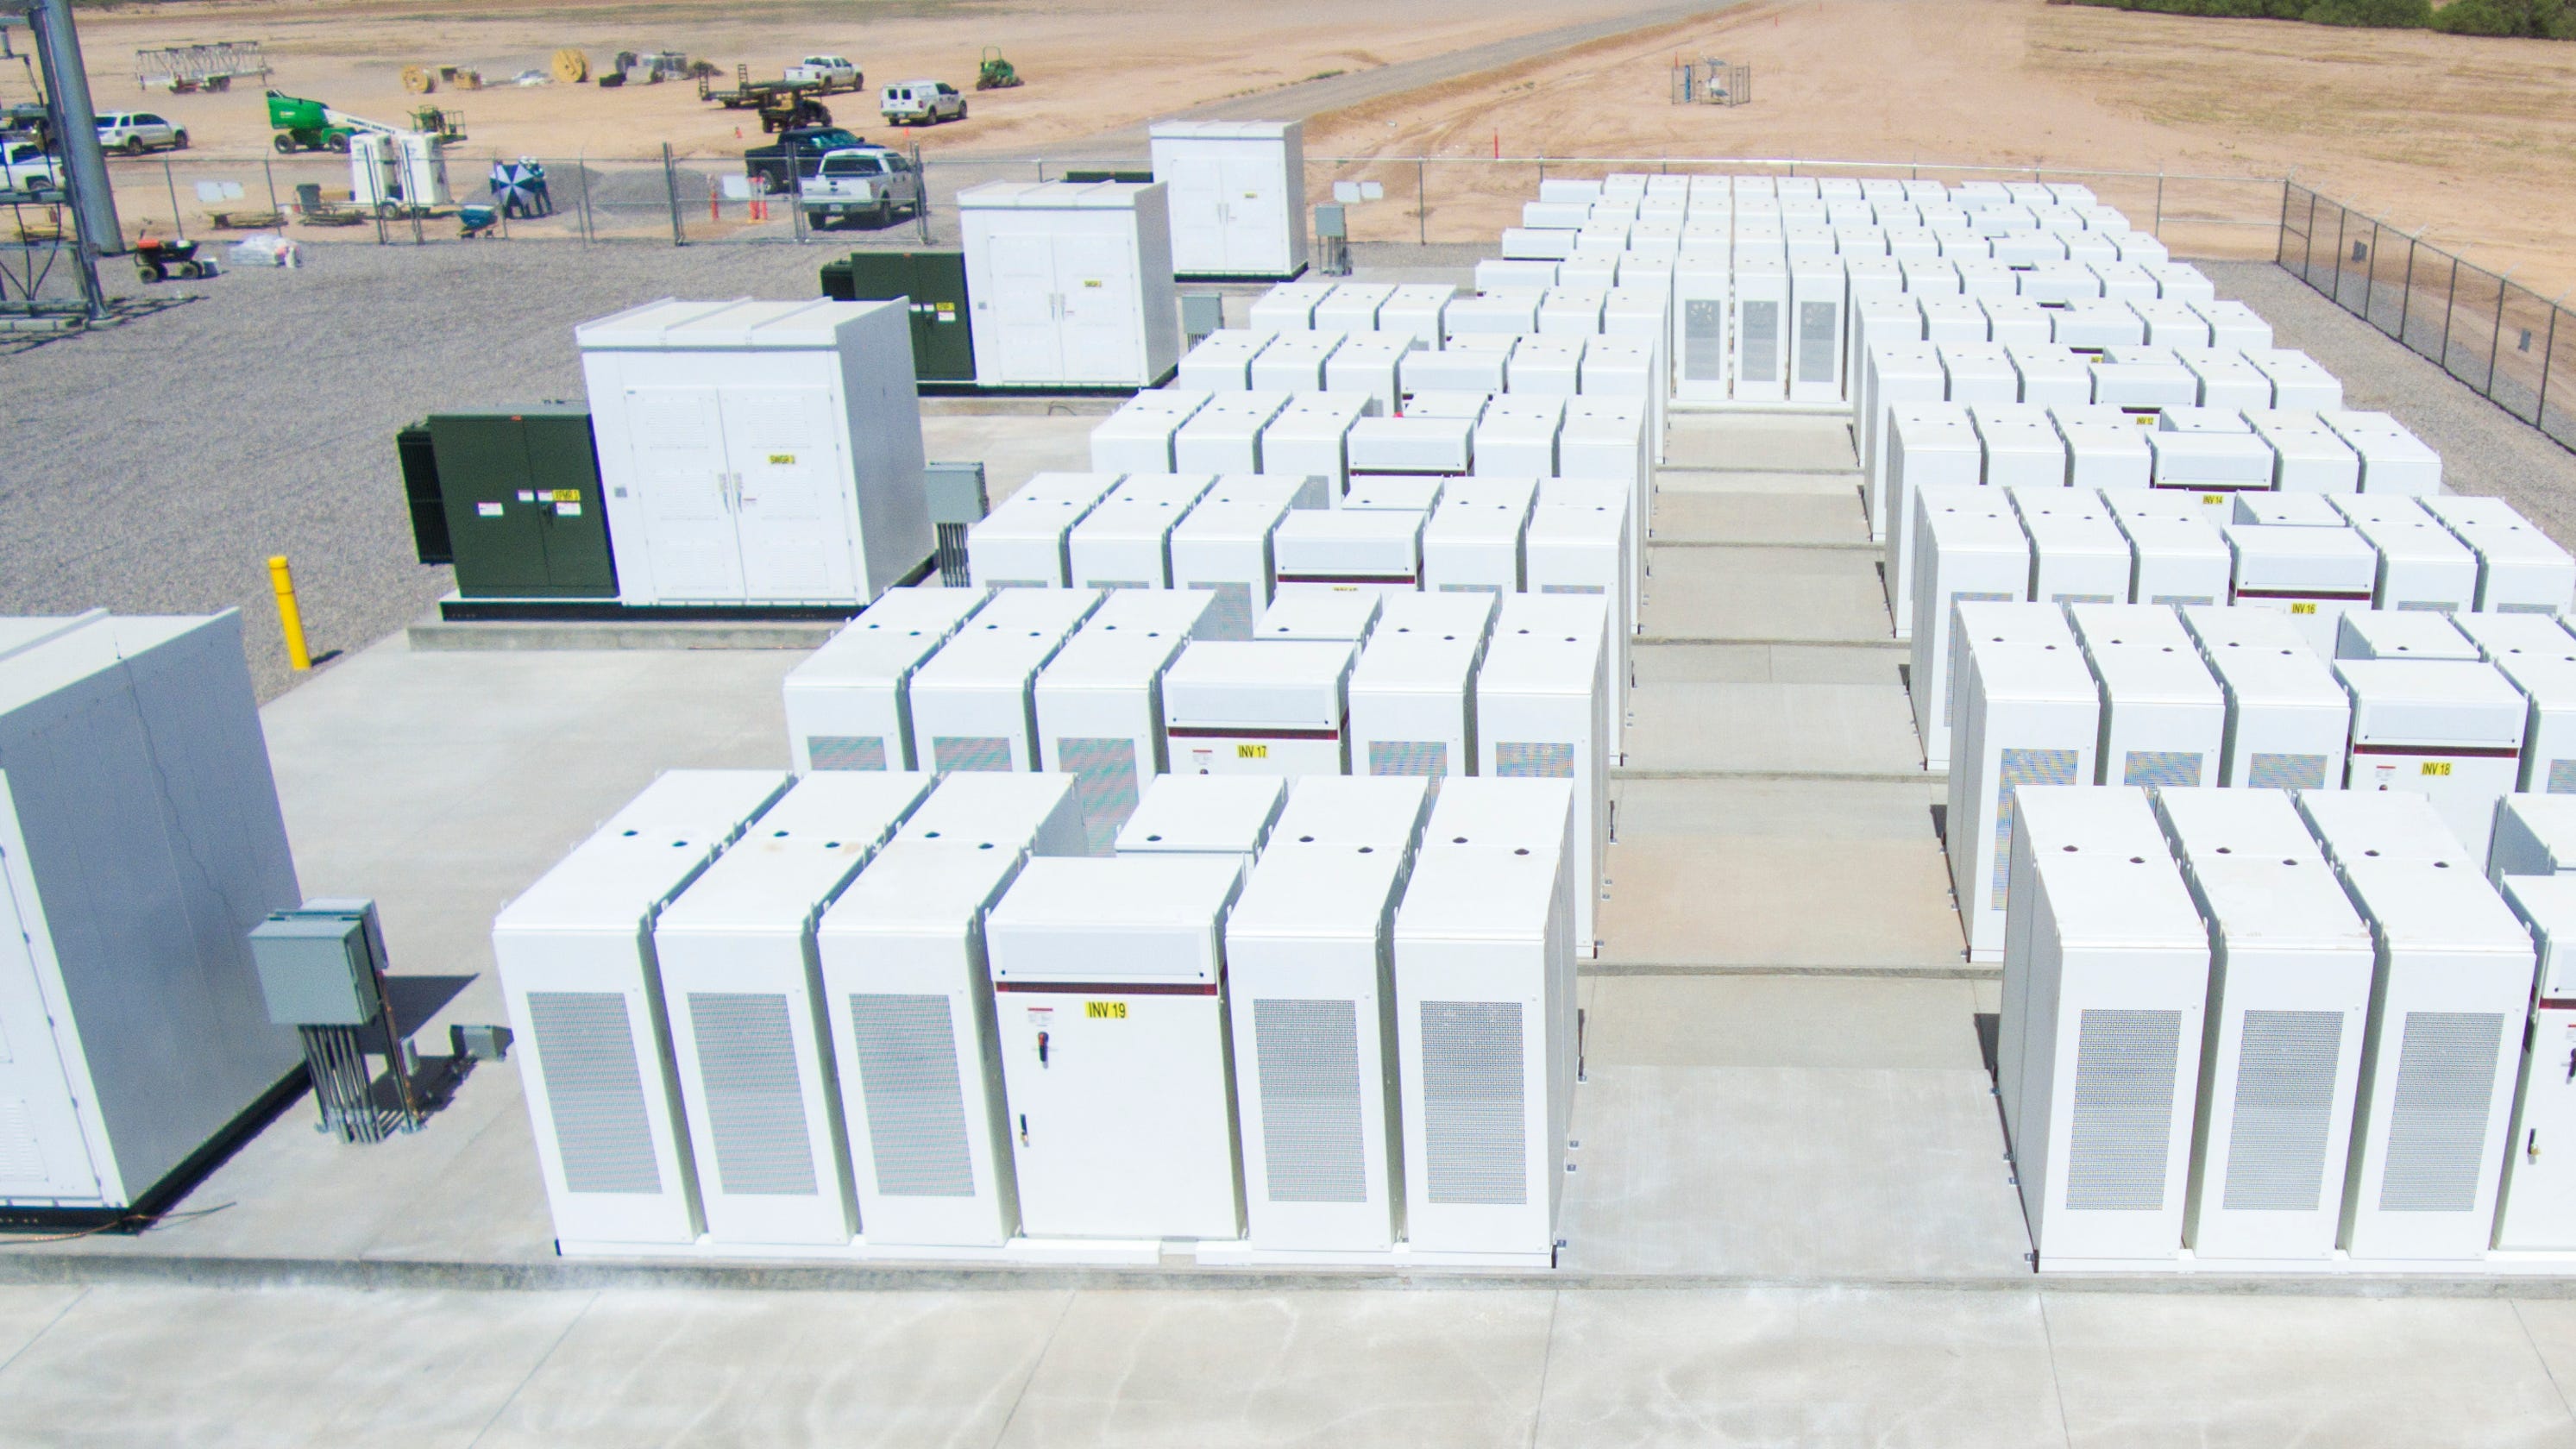 SRP plans to install Arizona's biggest battery for massive solar plant